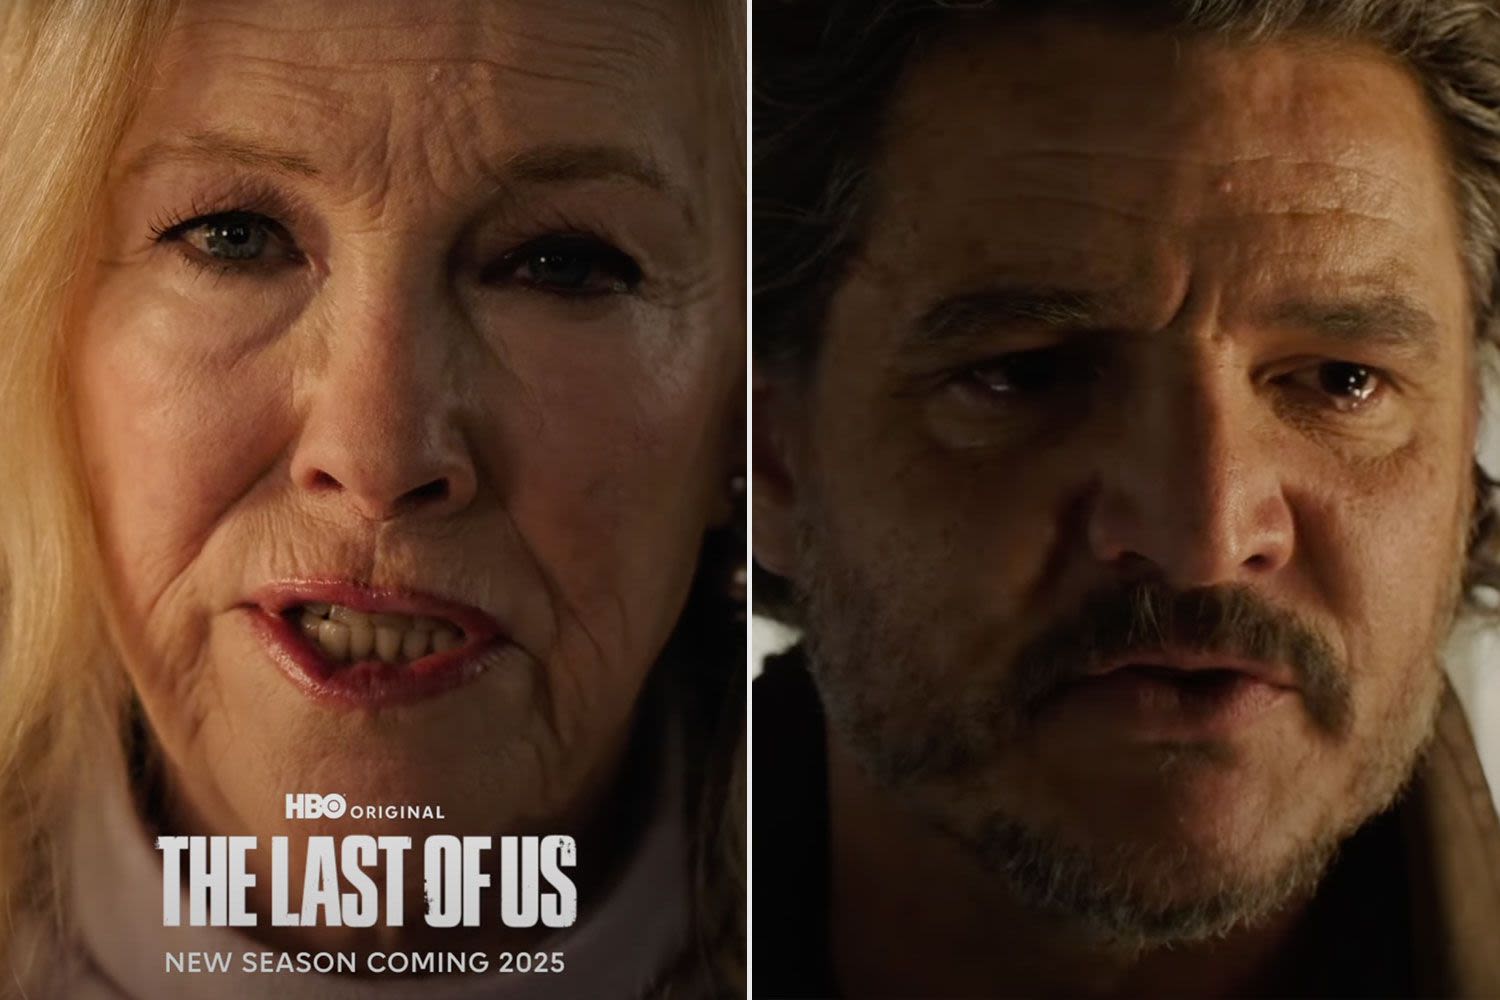 'The Last of Us' season 2 first footage reveals Catherine O'Hara's character, sees first look at Jeffrey Wright